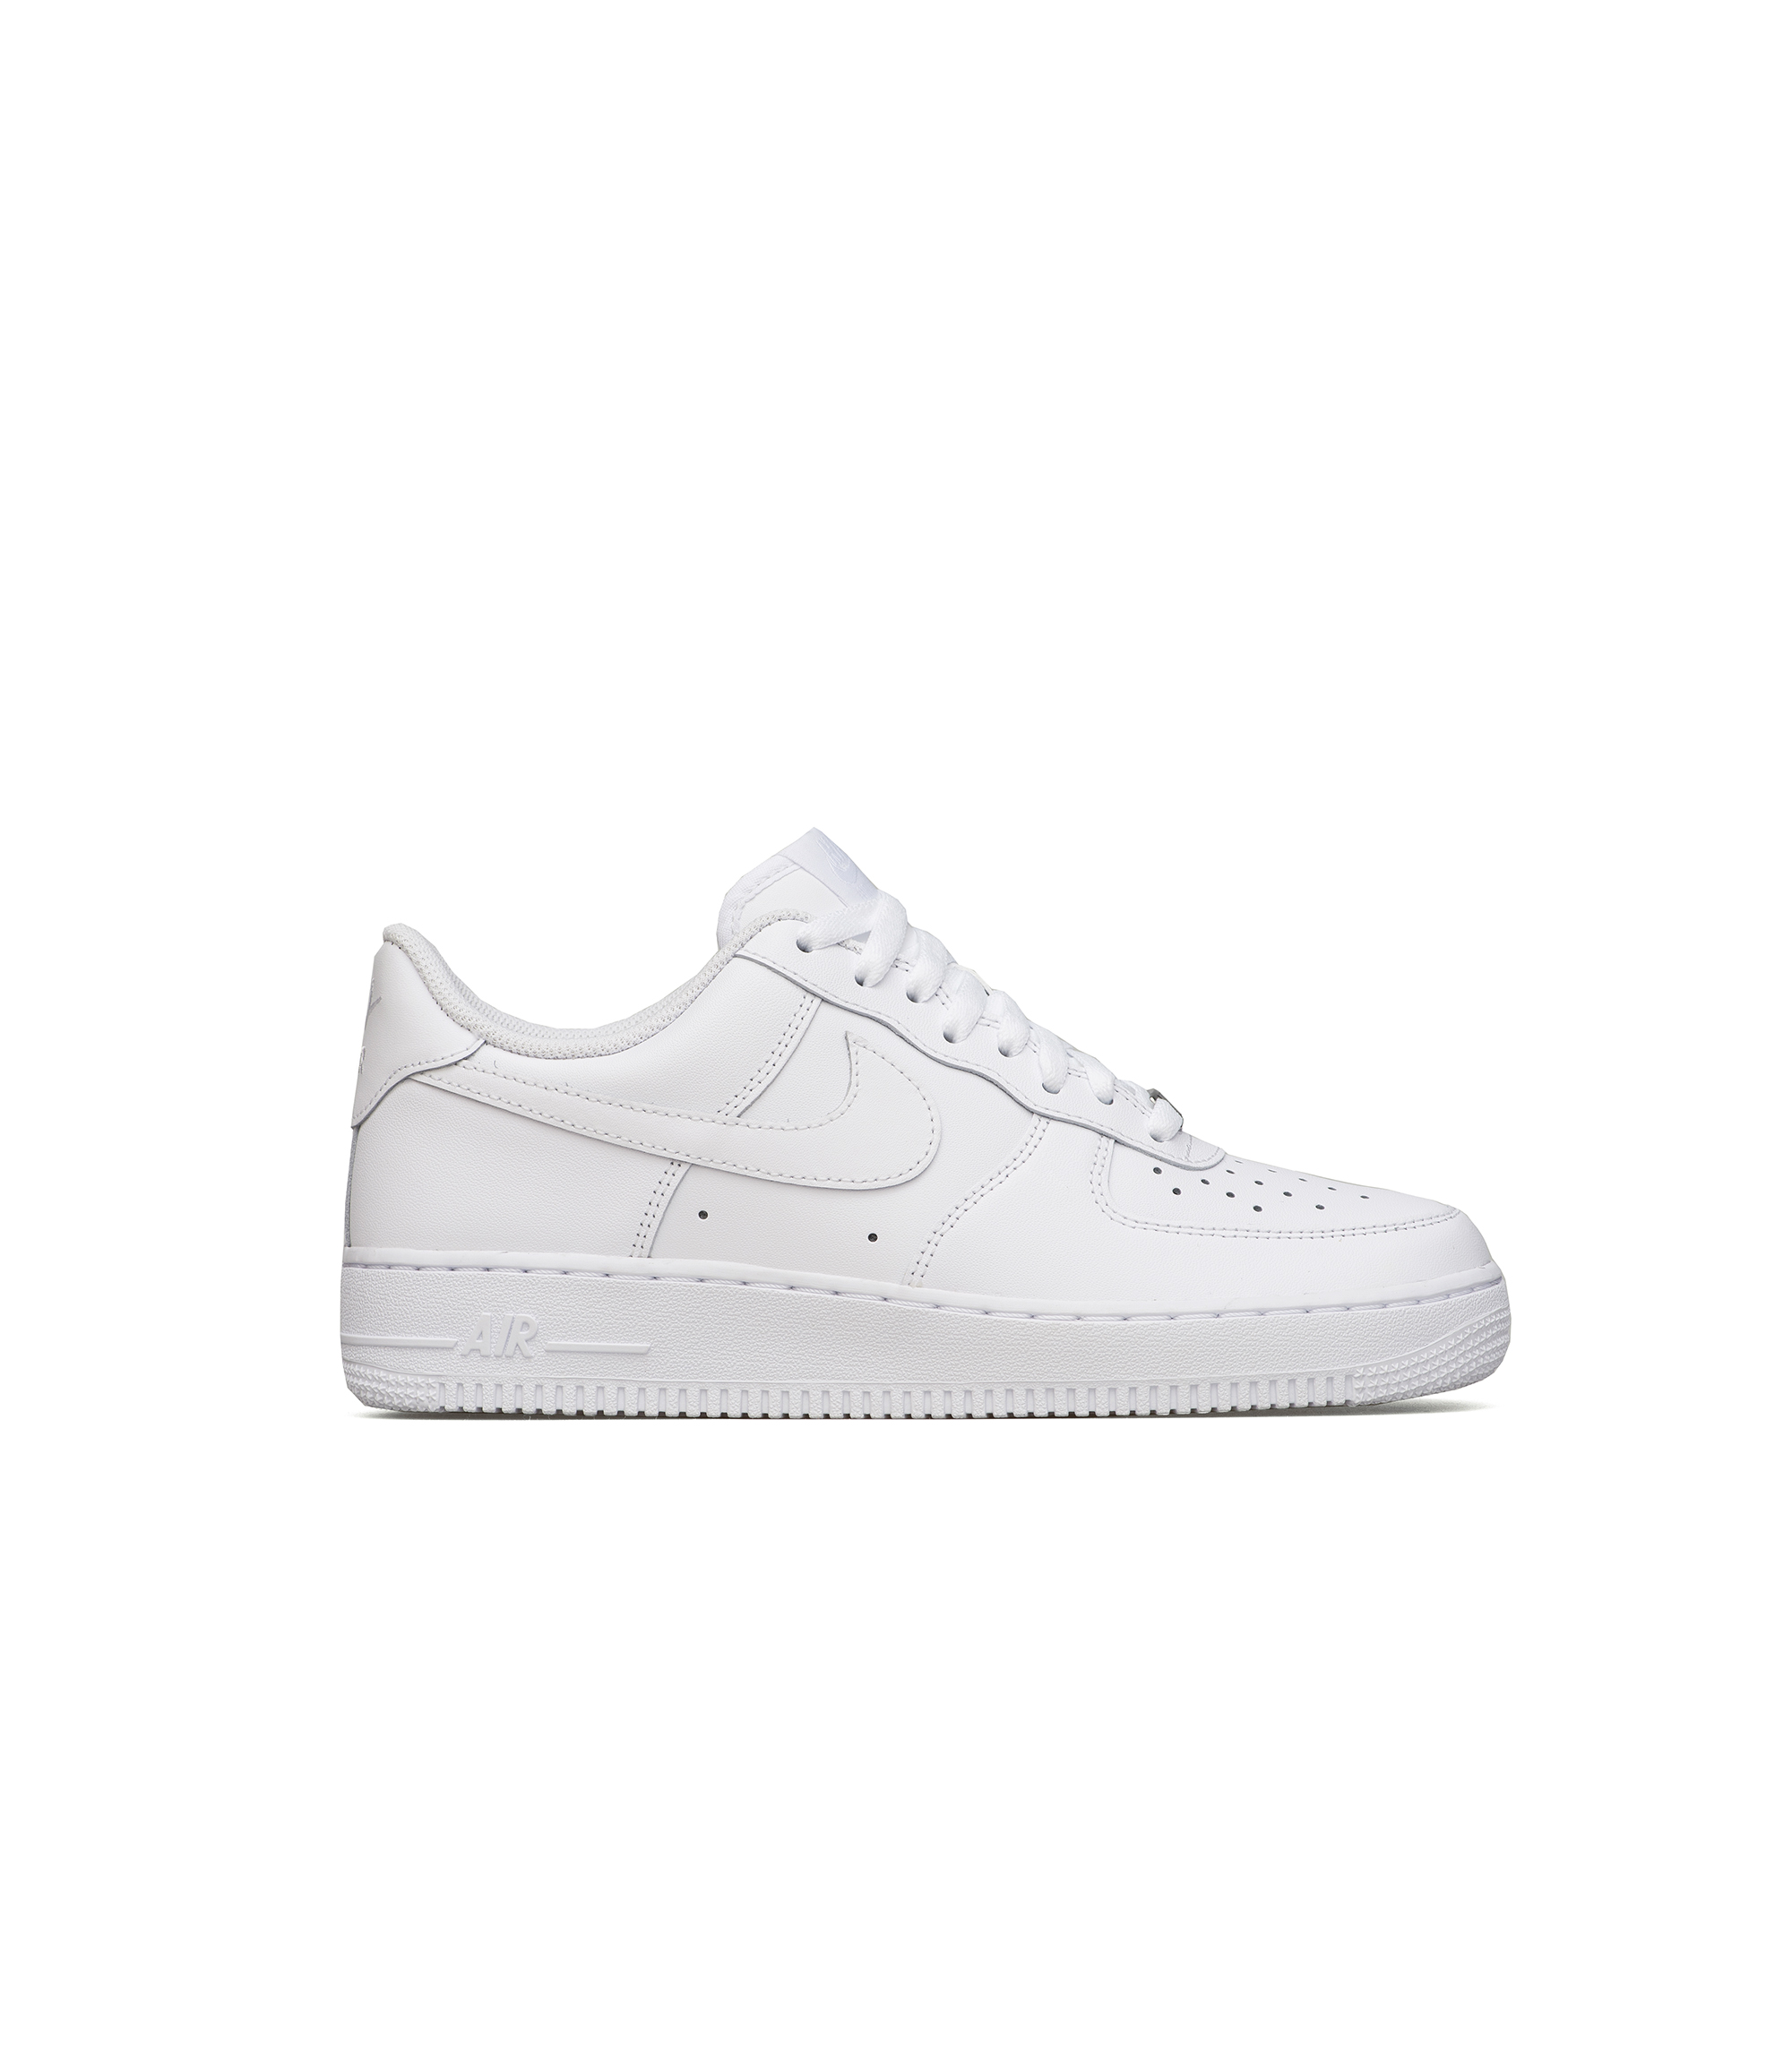 Shop Nike Air Force 1 '07 White at itk online store